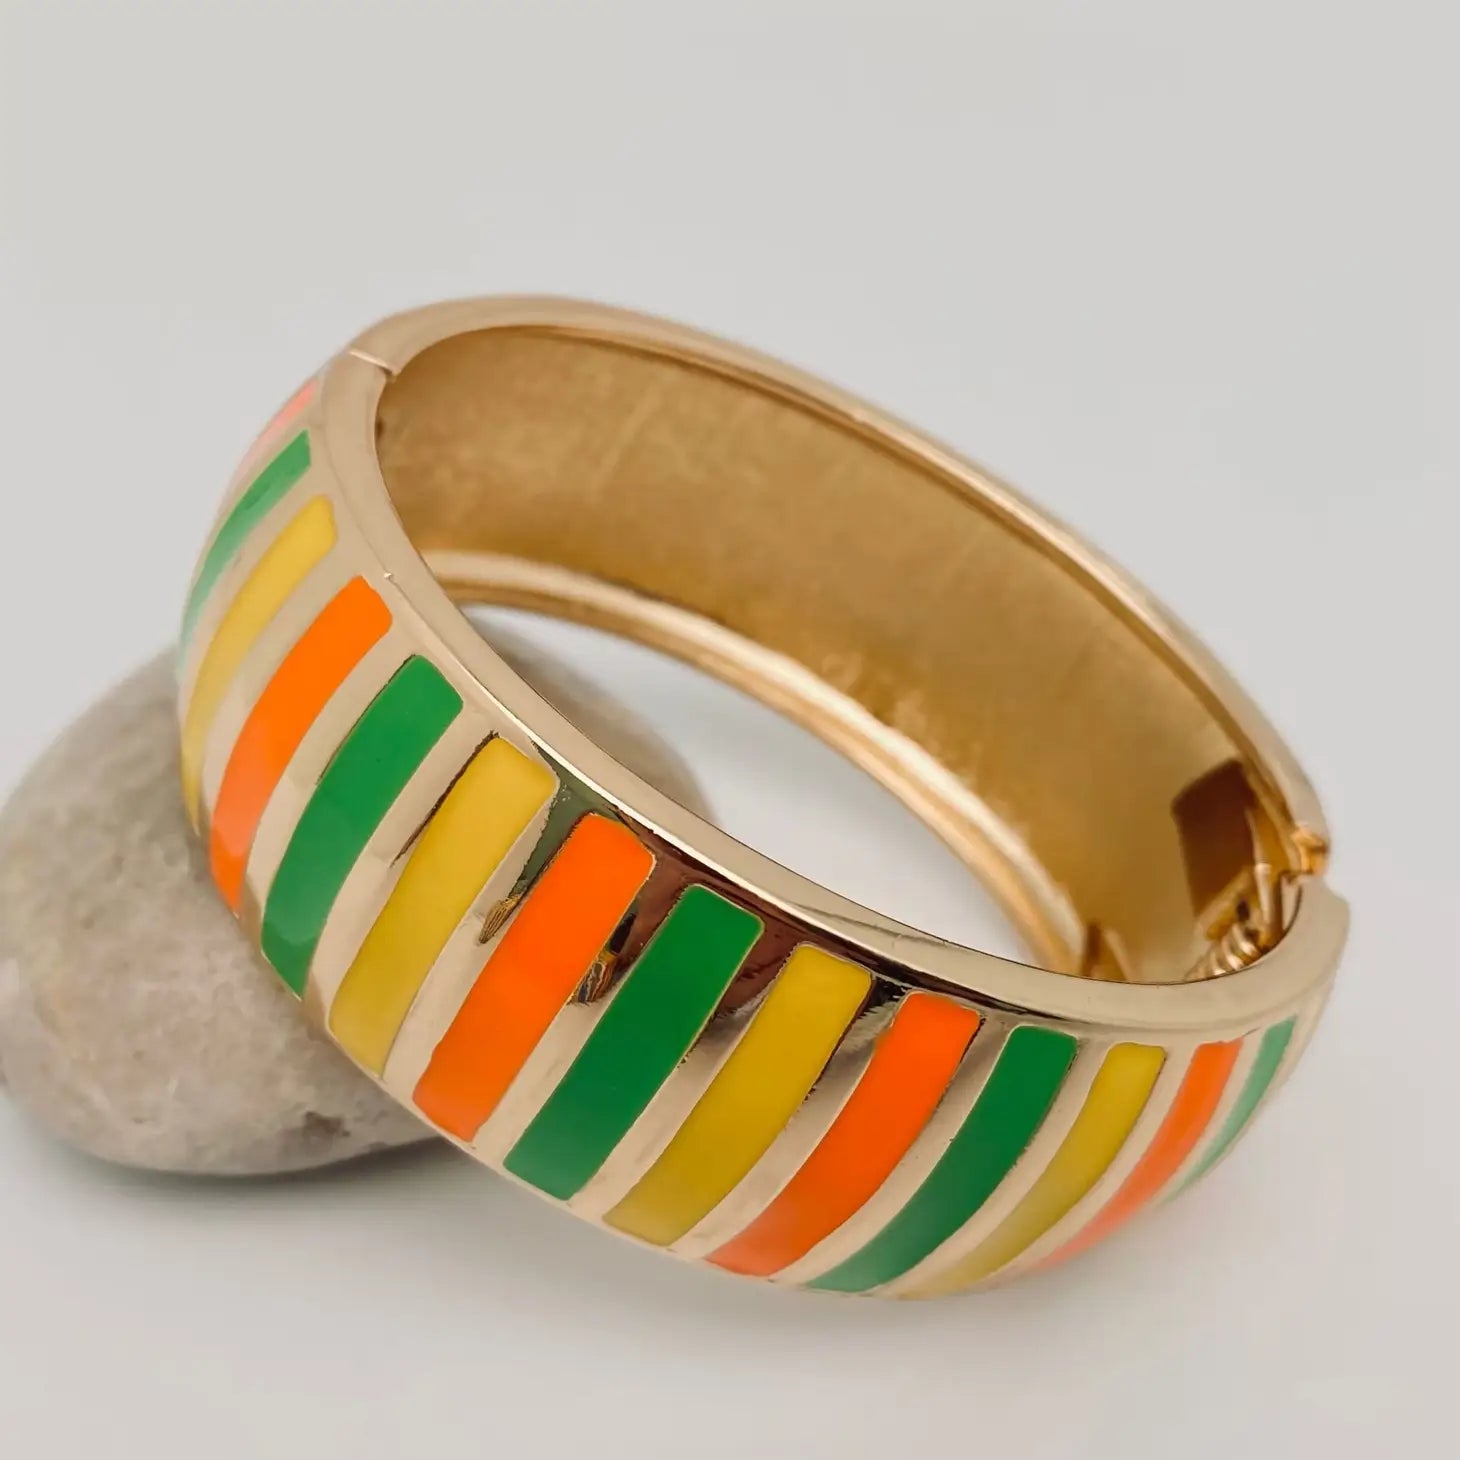 gold metal bangle with enameled yellow, green, and orange stripes & spring hinge and opening